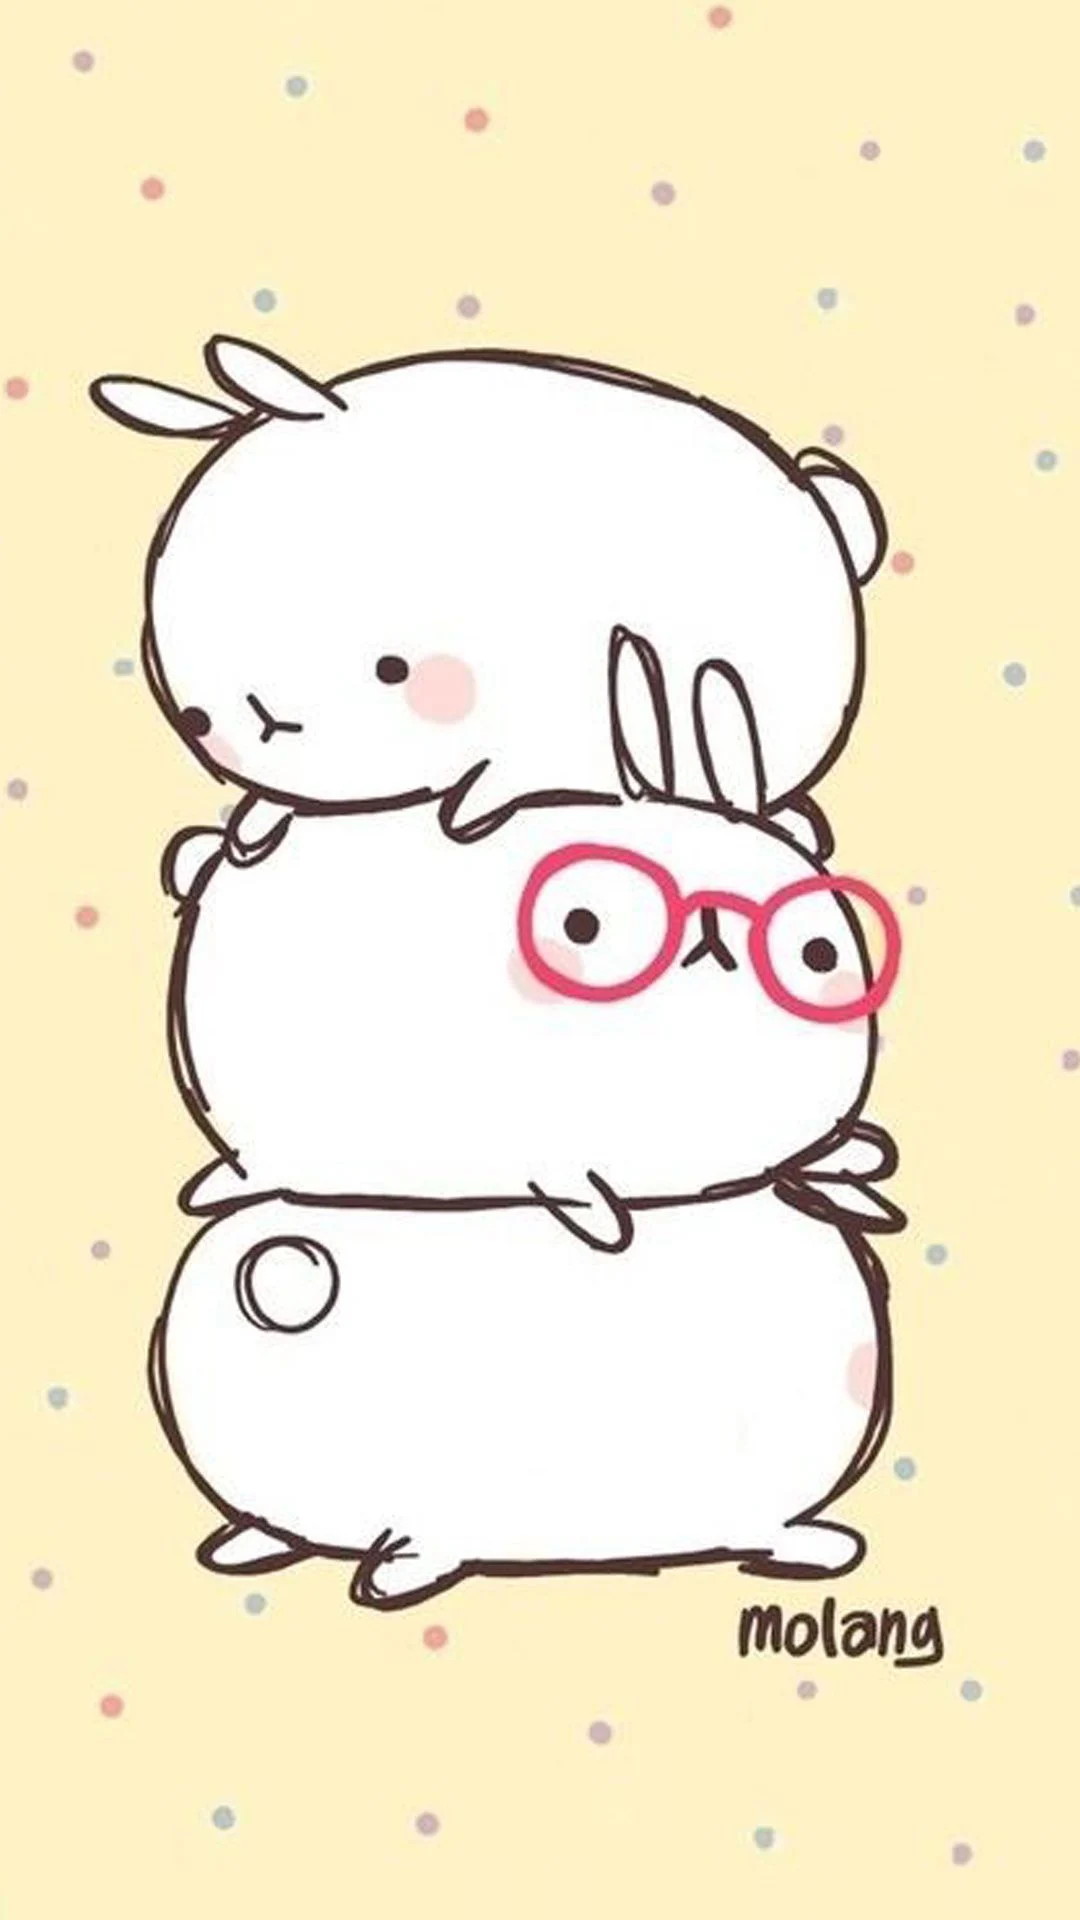 Cute Aesthetic iPhone 12 Wallpaper HD with high-resolution 1080x1920 pixel. Download all Mobile Wallpapers and Use them as wallpapers for your iPhone, Tablet, iPad, Android and other mobile devices